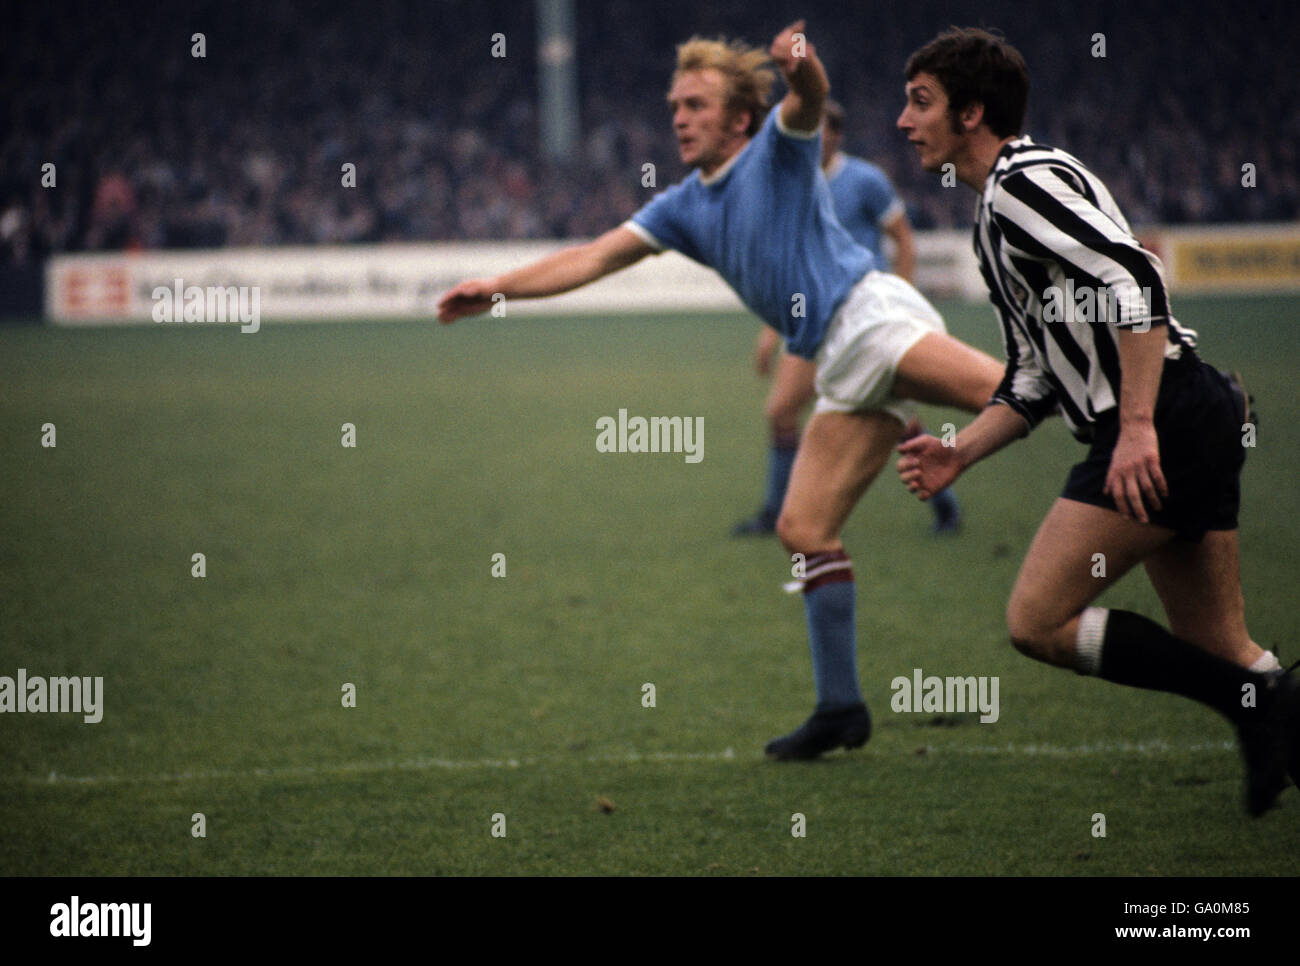 Soccer League Division One - Manchester City v Newcastle United - Maine Road Foto Stock